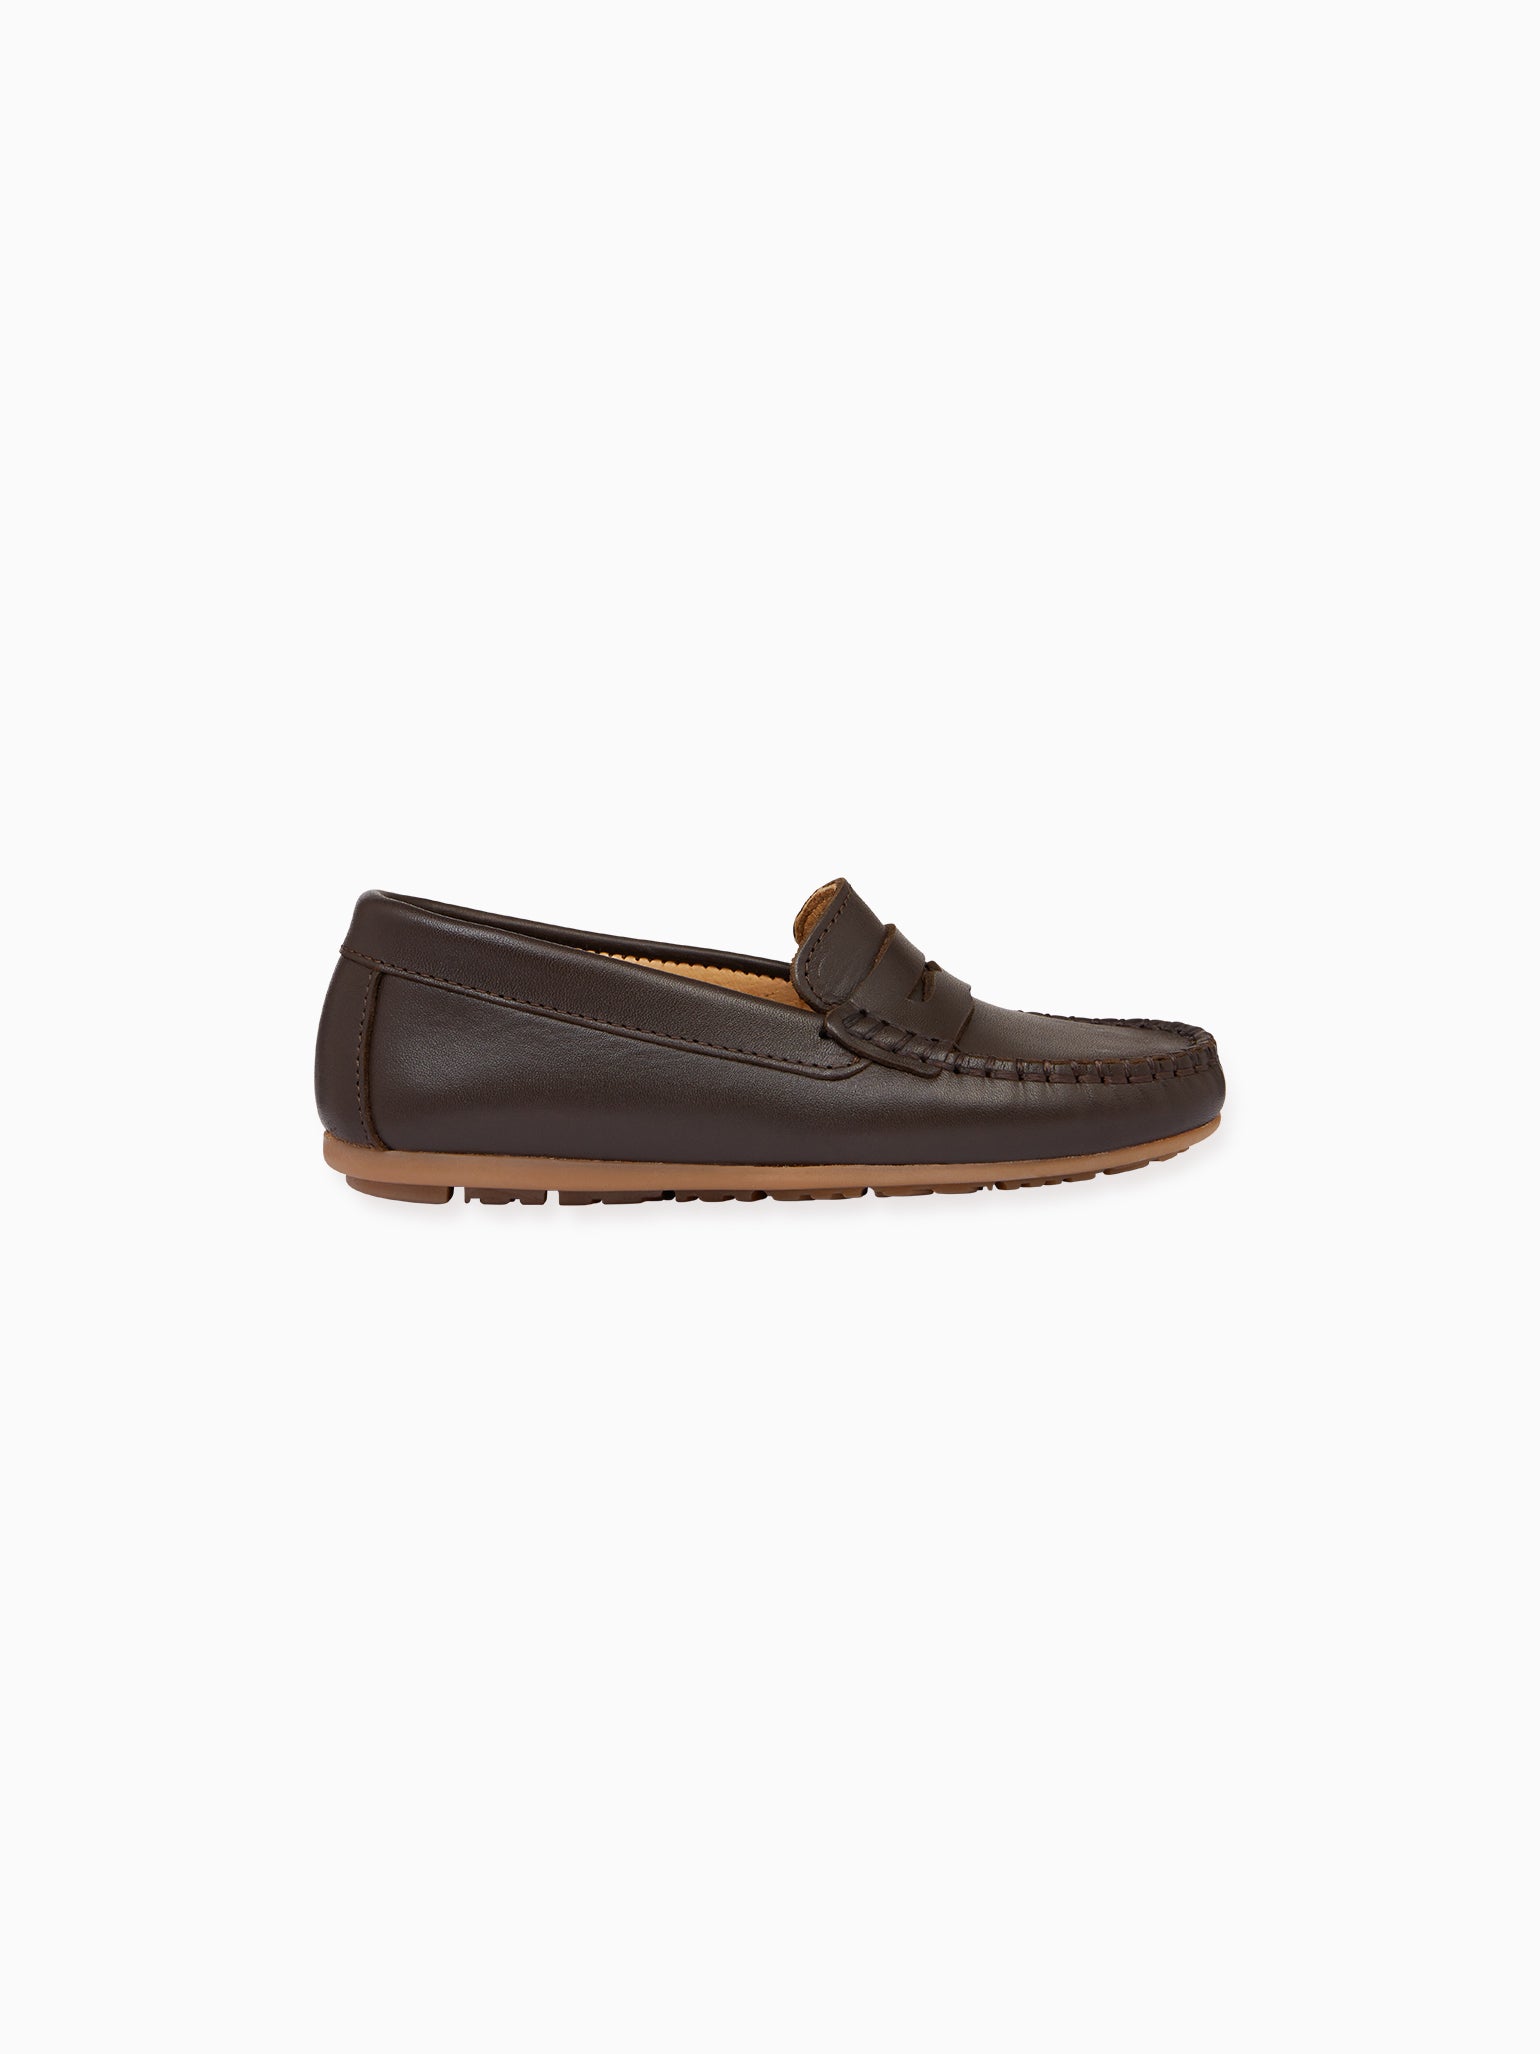 Chocolate Brown Leather Boy Loafer Shoes